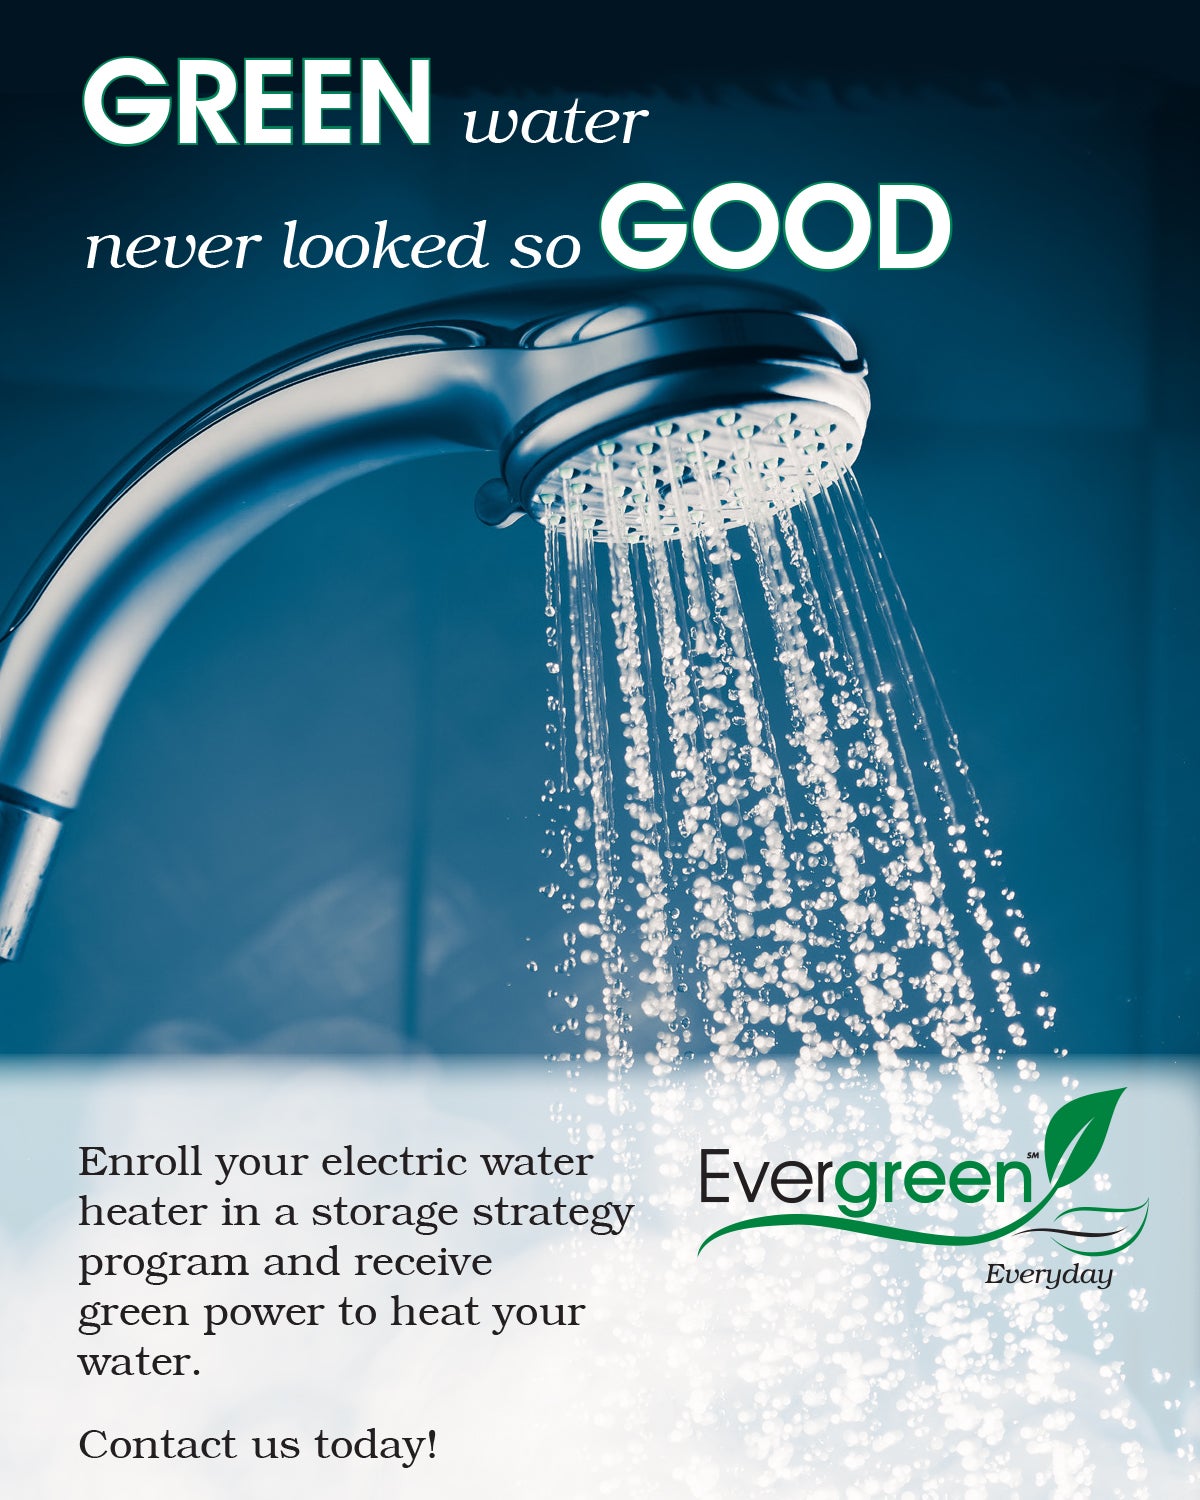 water coming out of shower head with text green water never looked so good